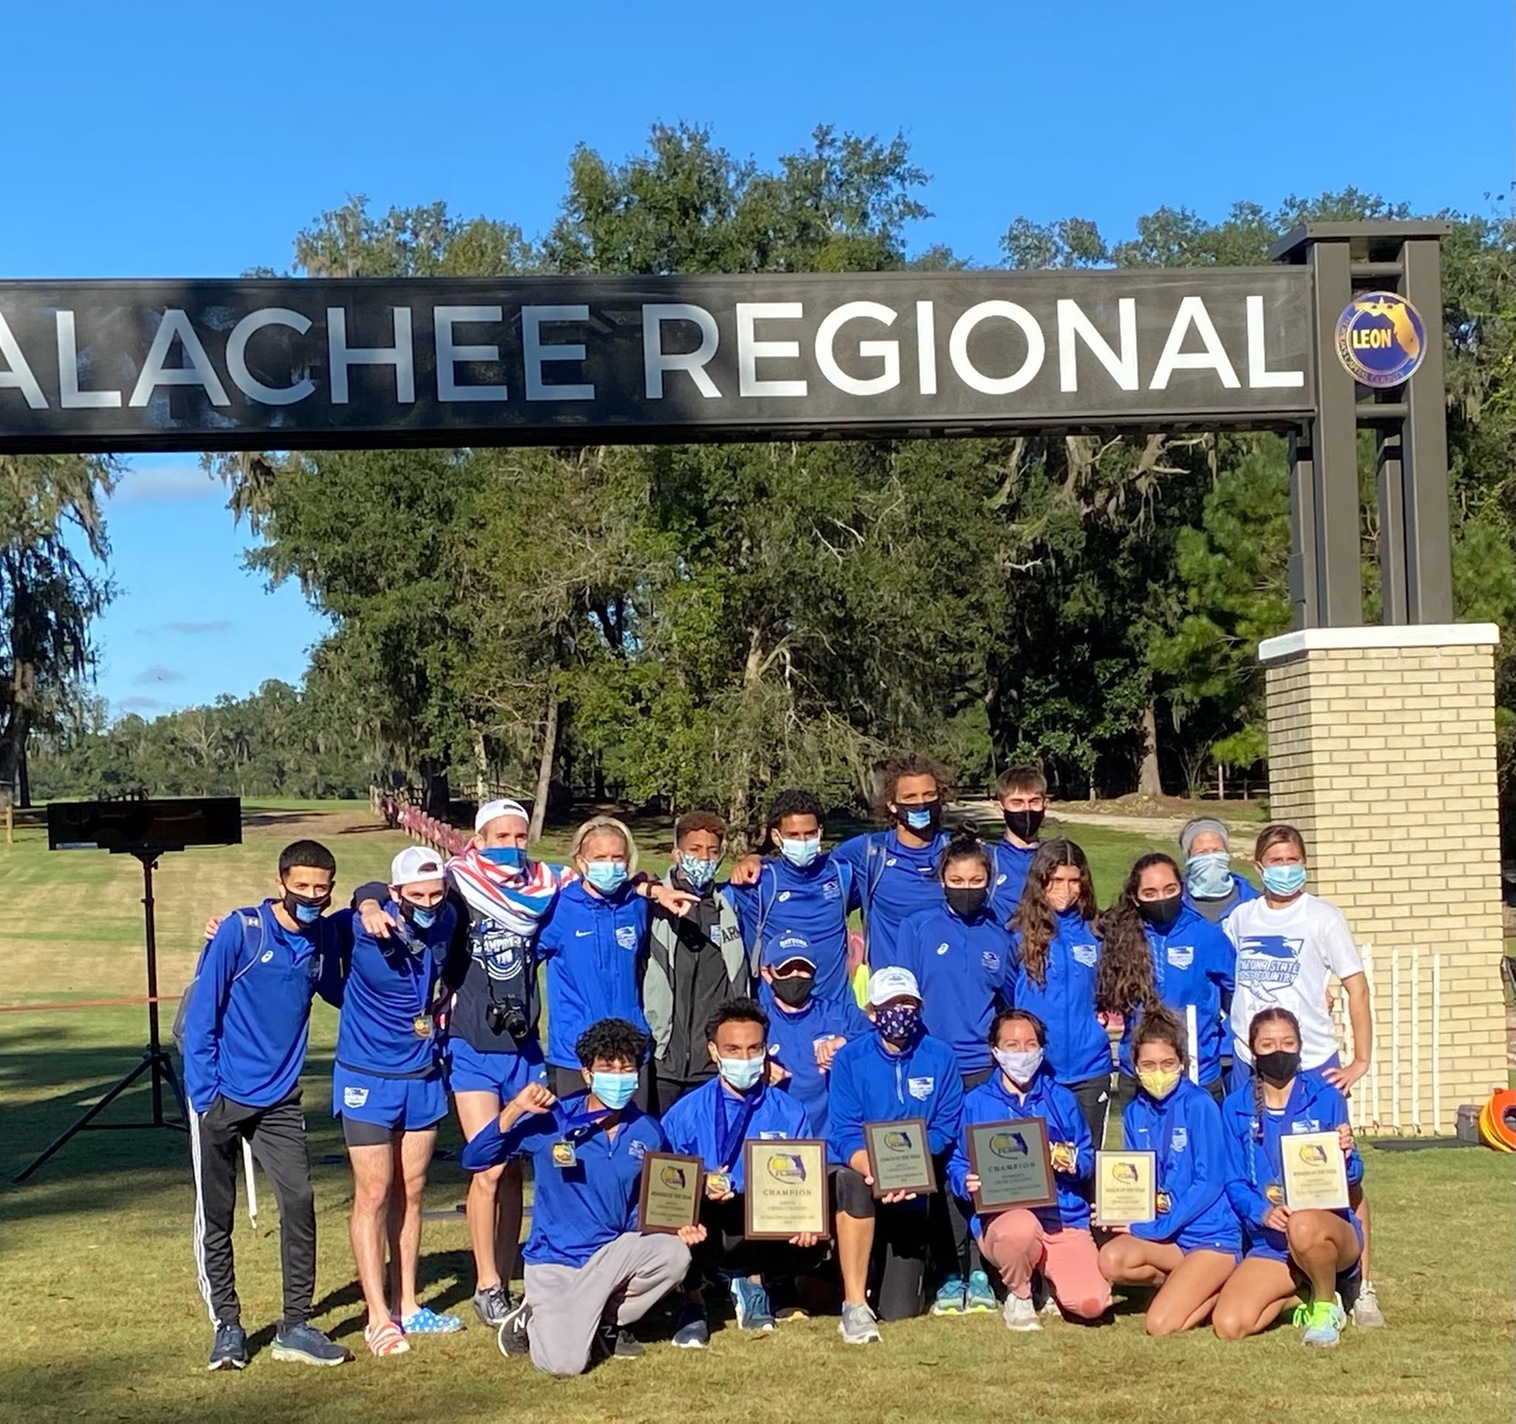 Falcons capture all four titles at Region 8 meet